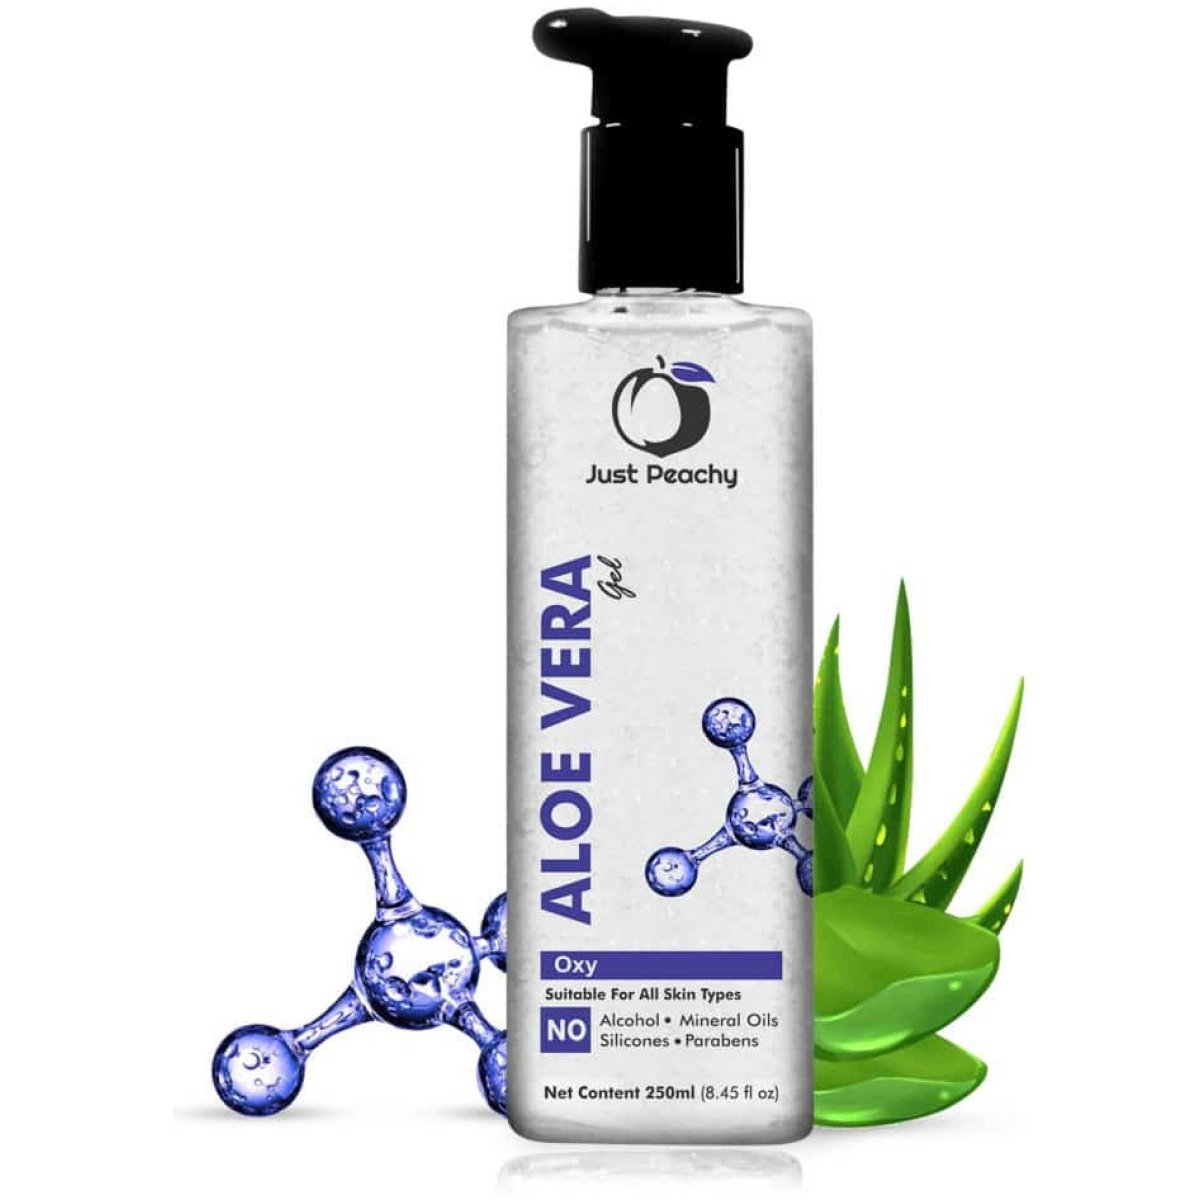 Just Peachy Oxy Aloe Vera Multipurpose Gel For Acne Scars And Glowing Skin Treatment 250ml